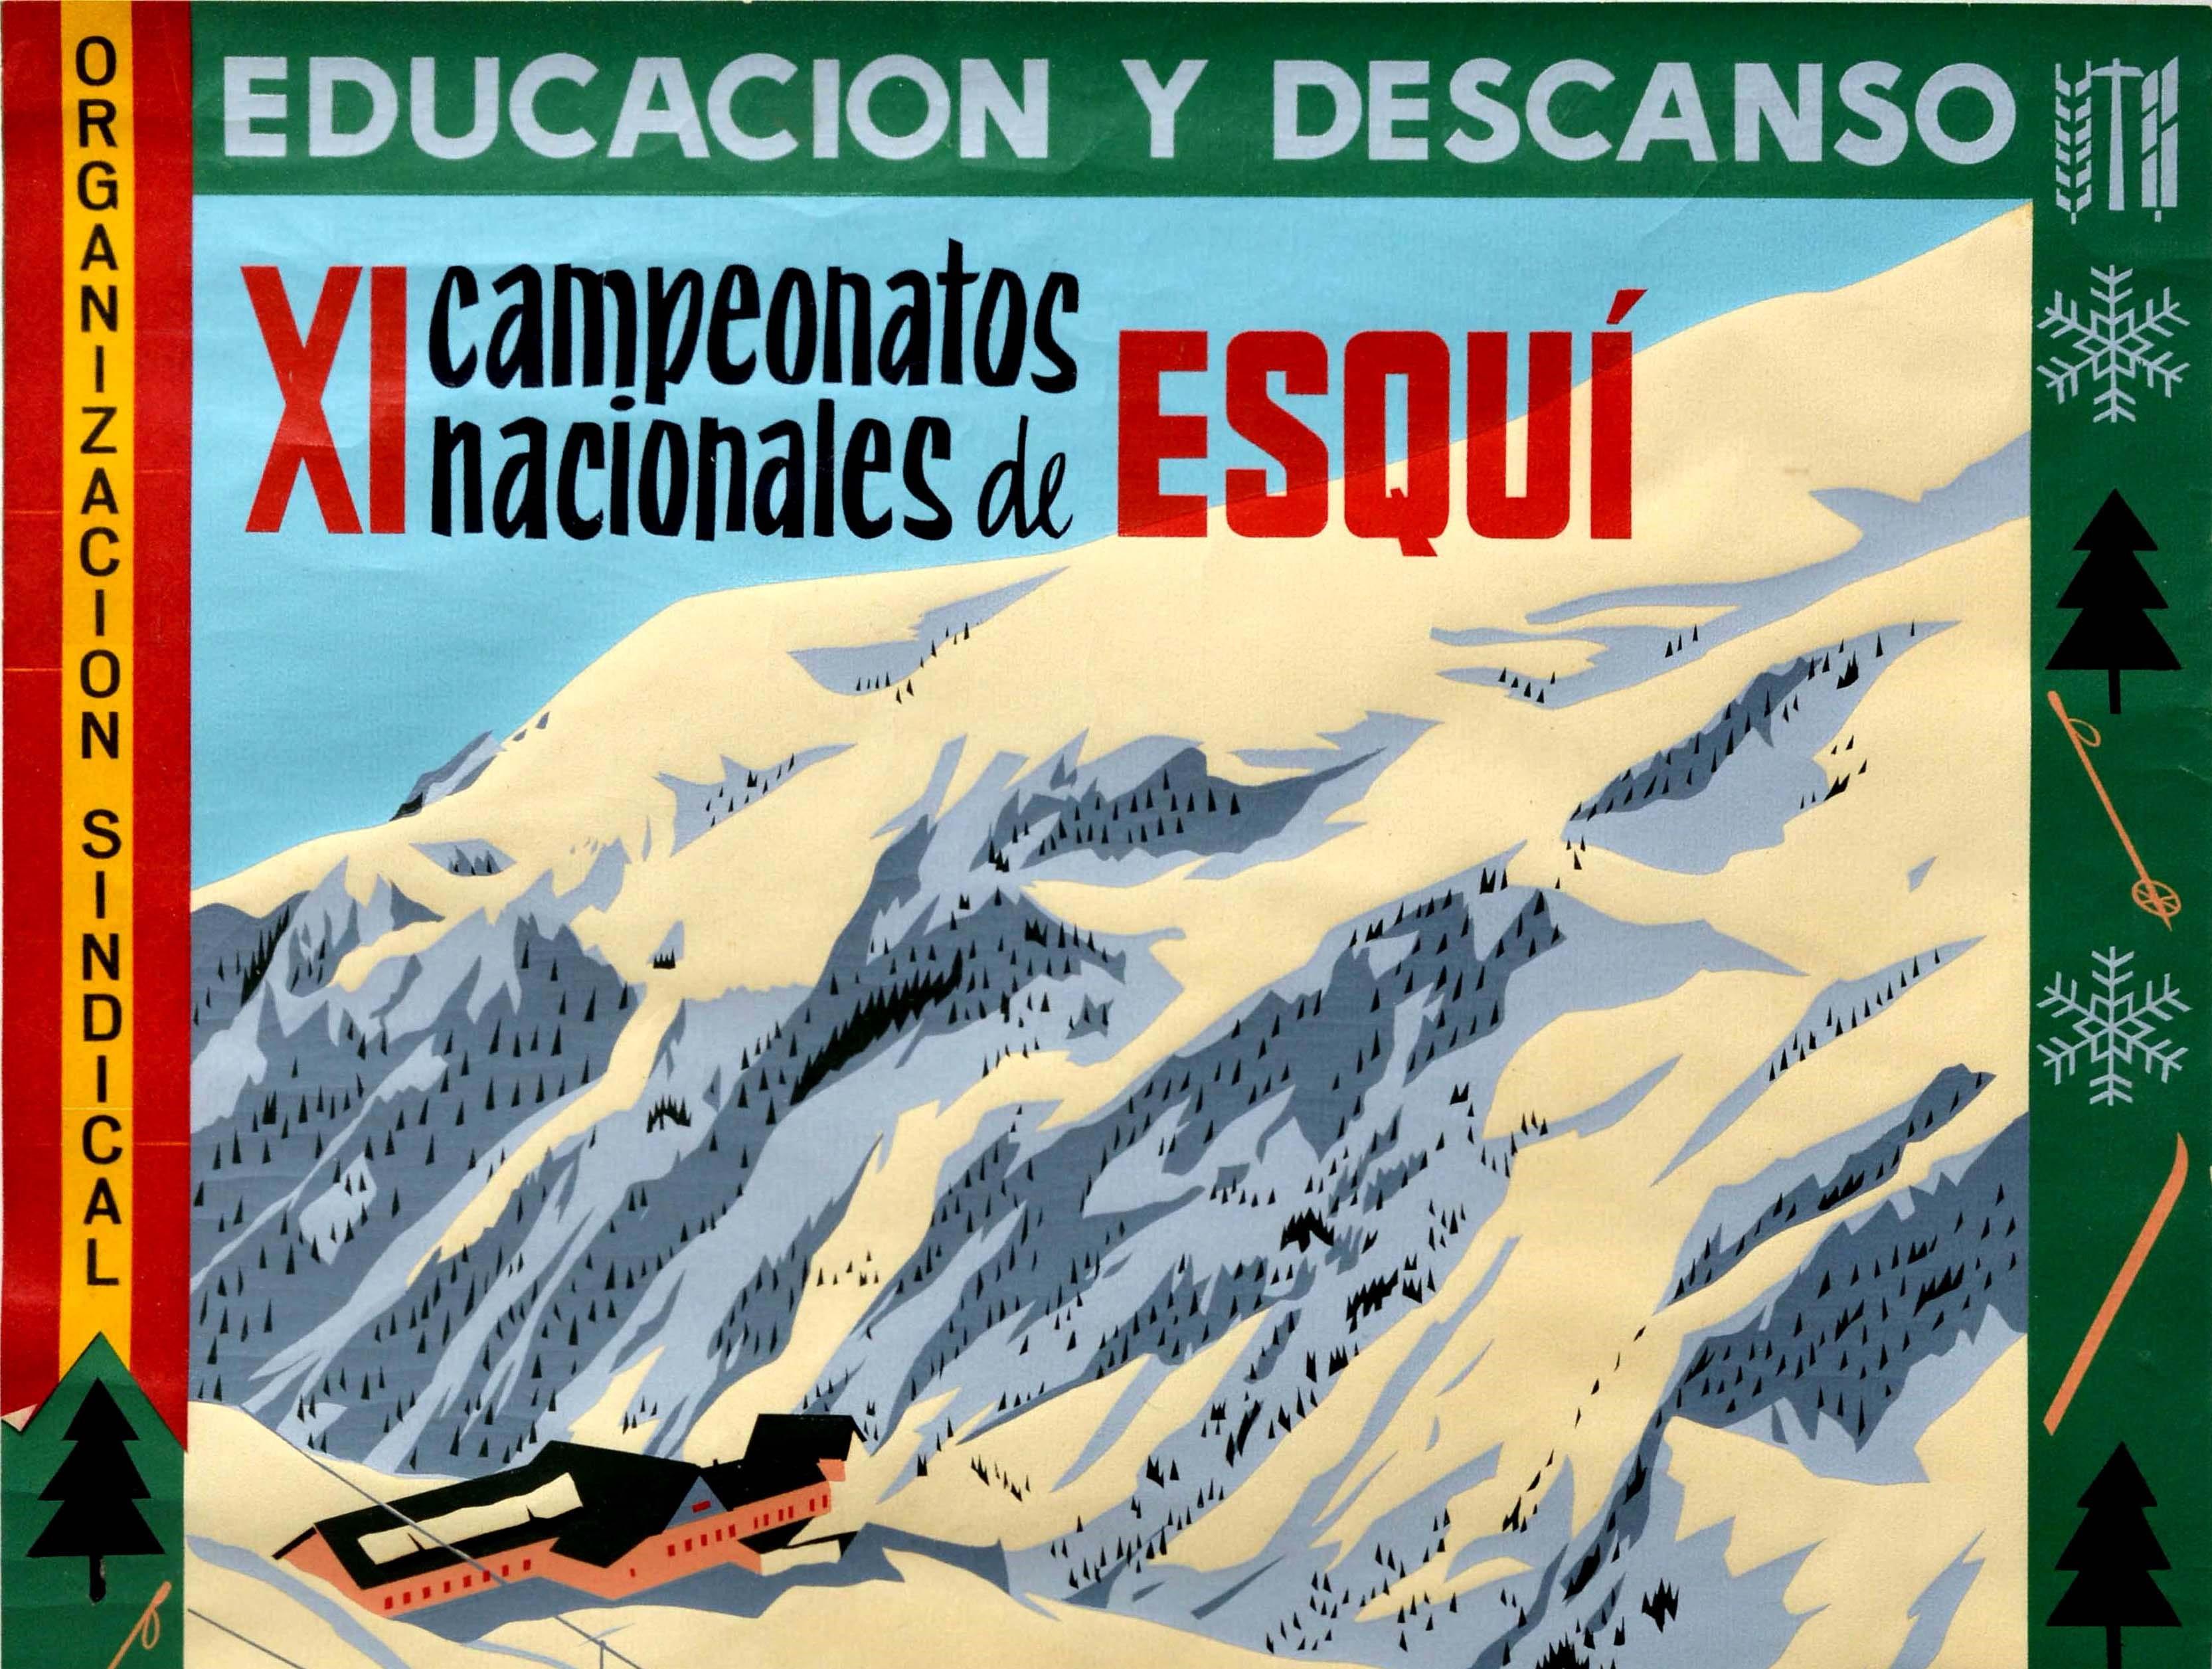 Original vintage winter sport poster advertising for the Educacion y Descanso XI Campeonatos Nacionales de Esqui / Education and Leisure XI National Ski Championships held on 12-17 March 1962 in Nuria featuring a great illustration of a skier in